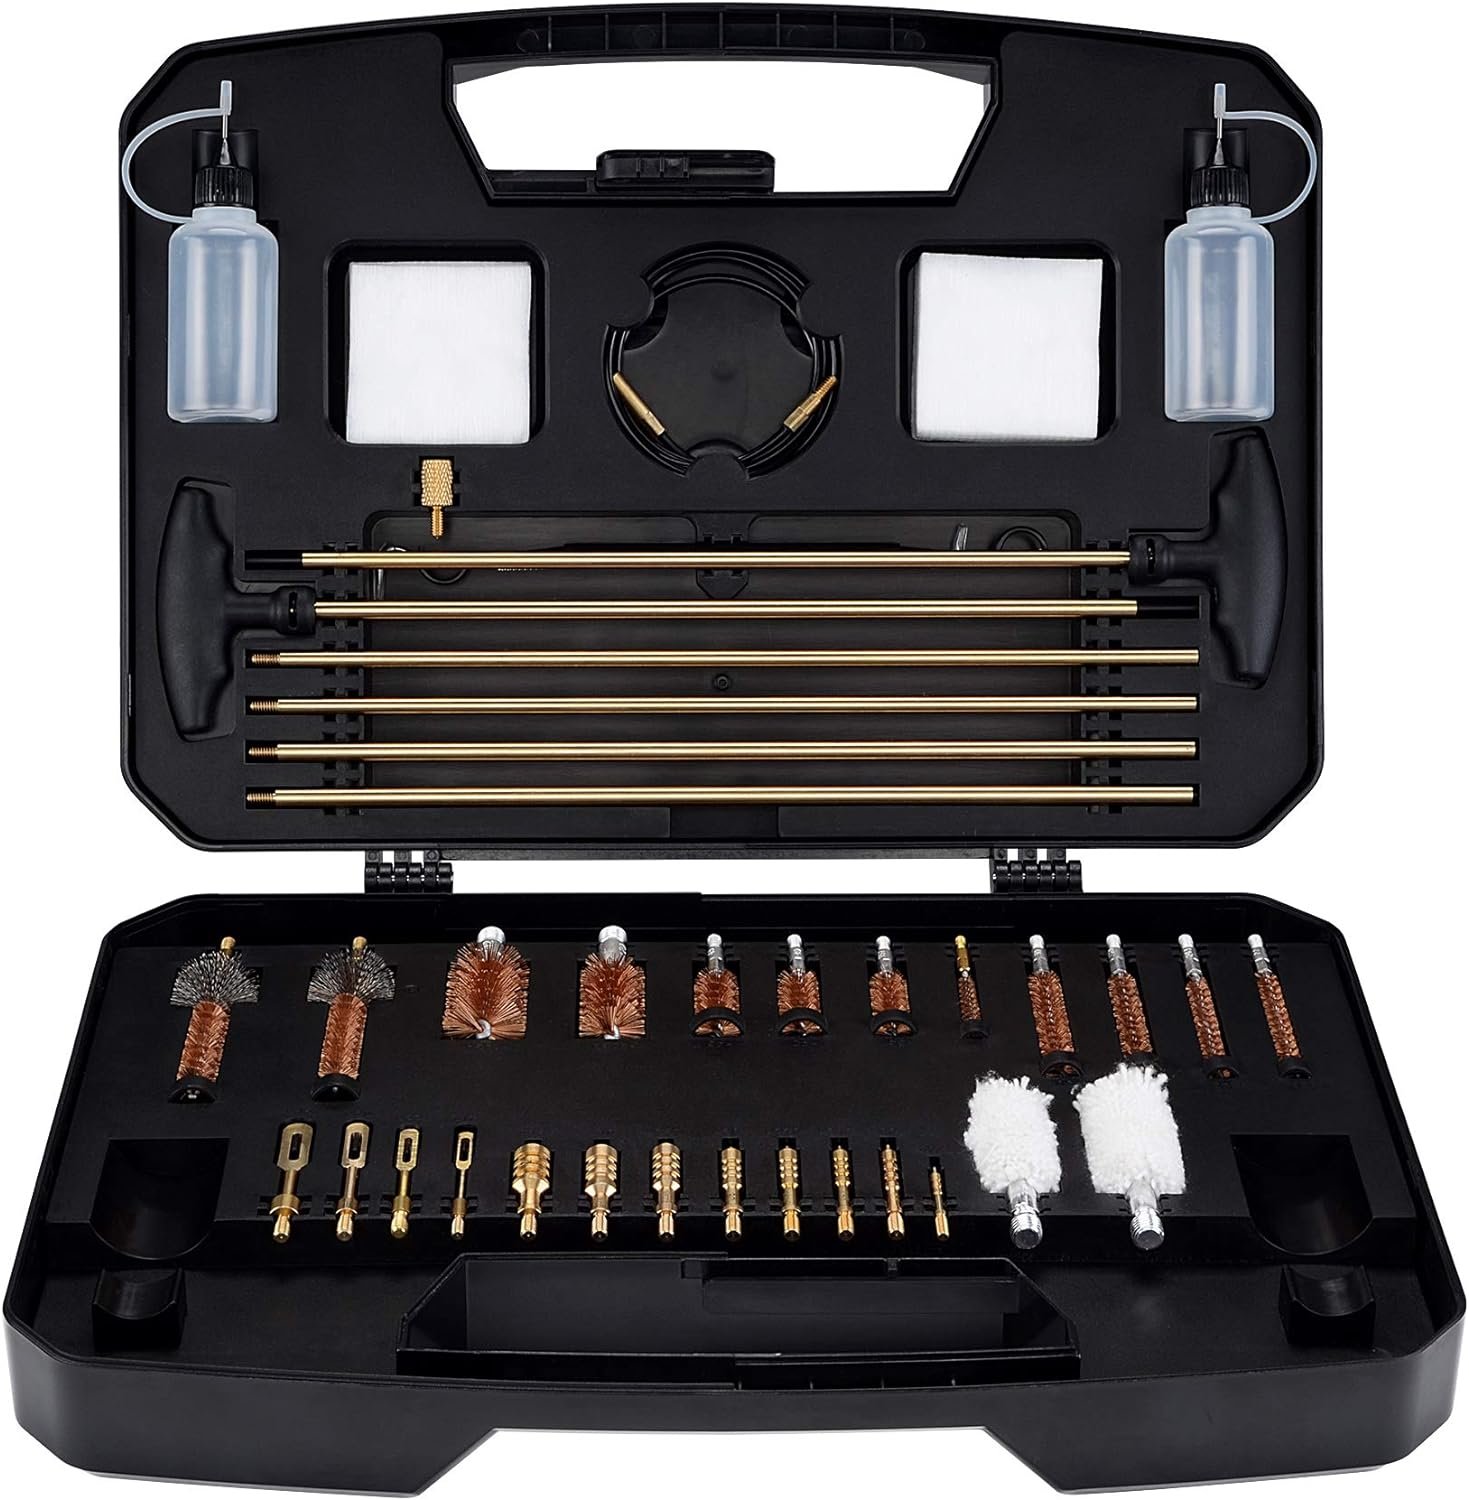 BOOSTEADY Pro Gun Cleaning Kit Review